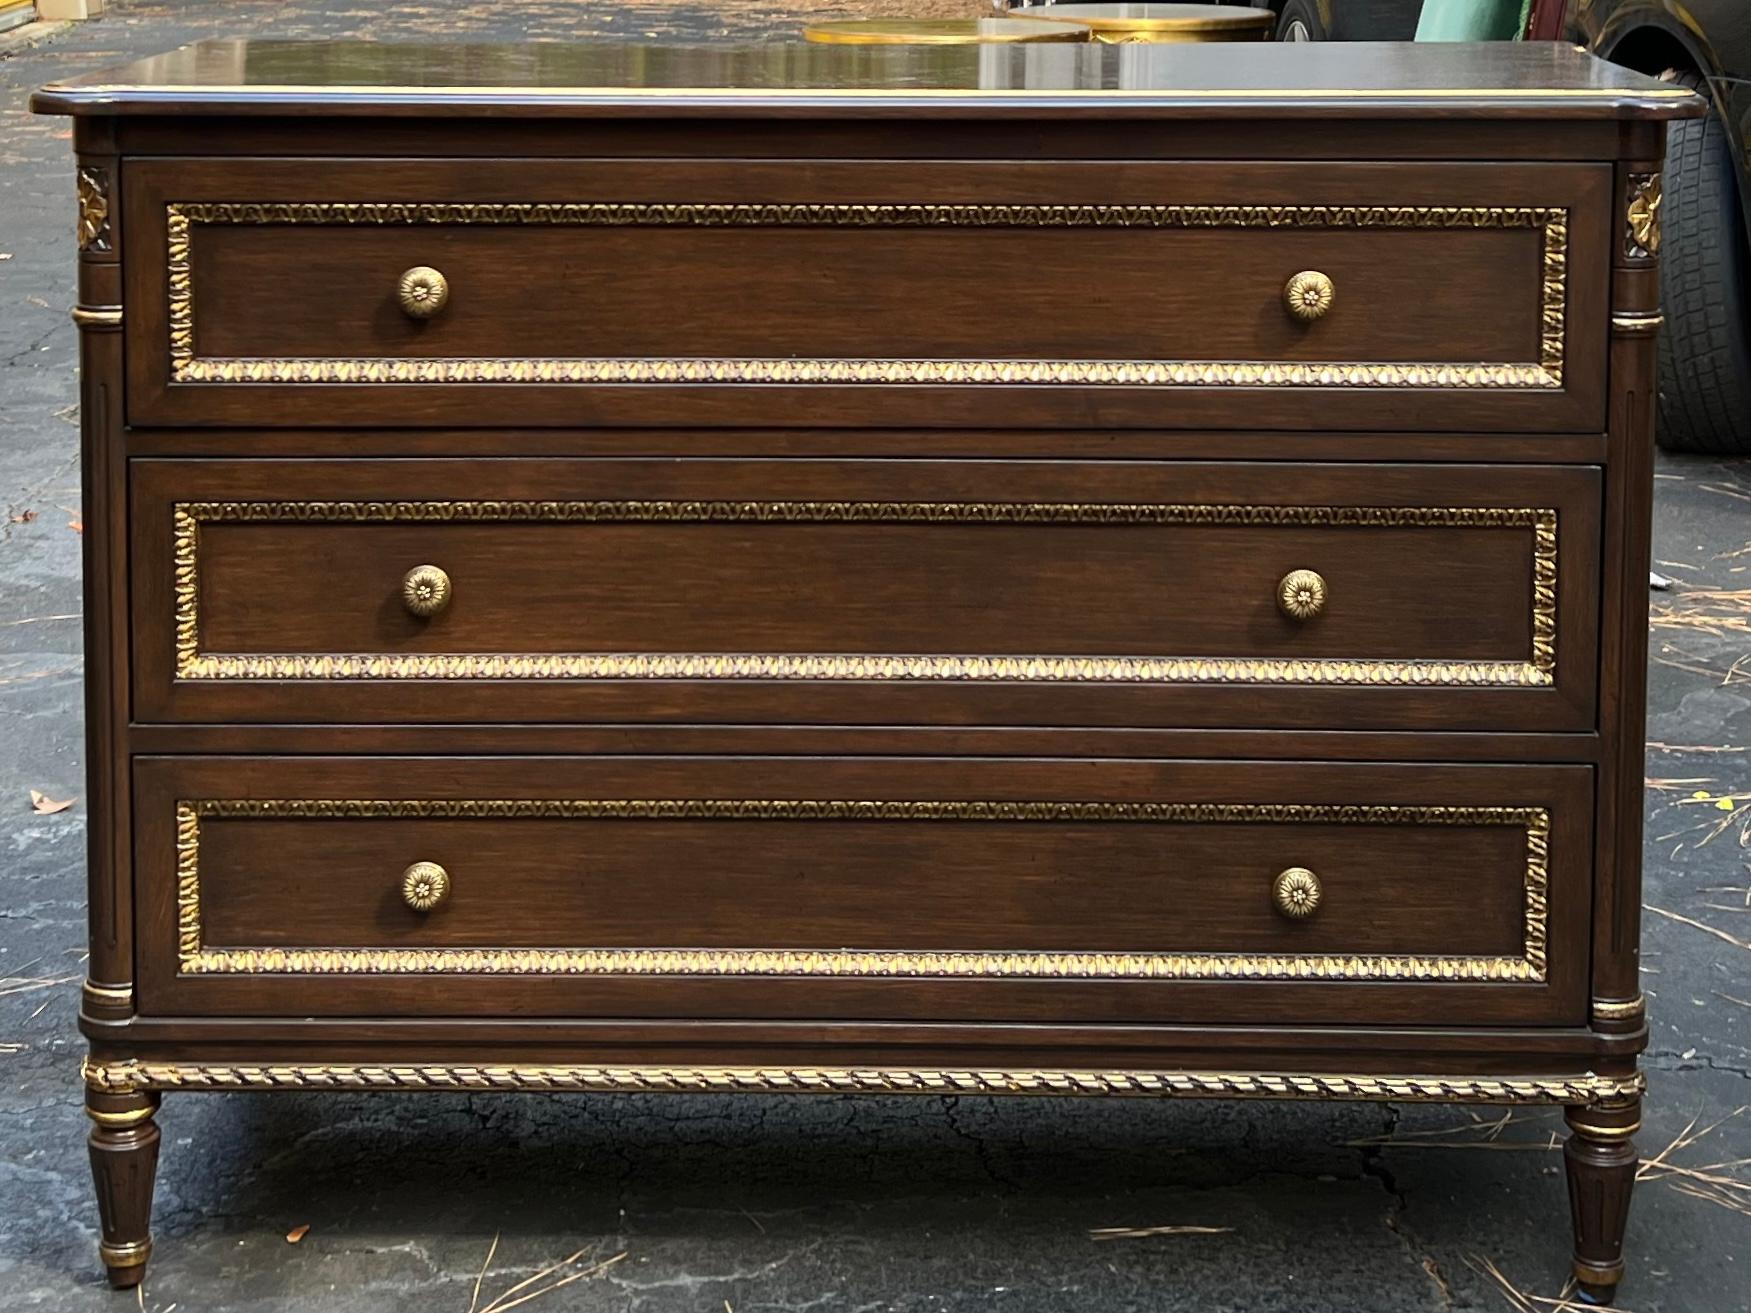 This is a pair of Louis XVI style chests or commodes in very good condition. They are cherry with gilt accents. They date to the later part of the 20th century and were manufactured in America.